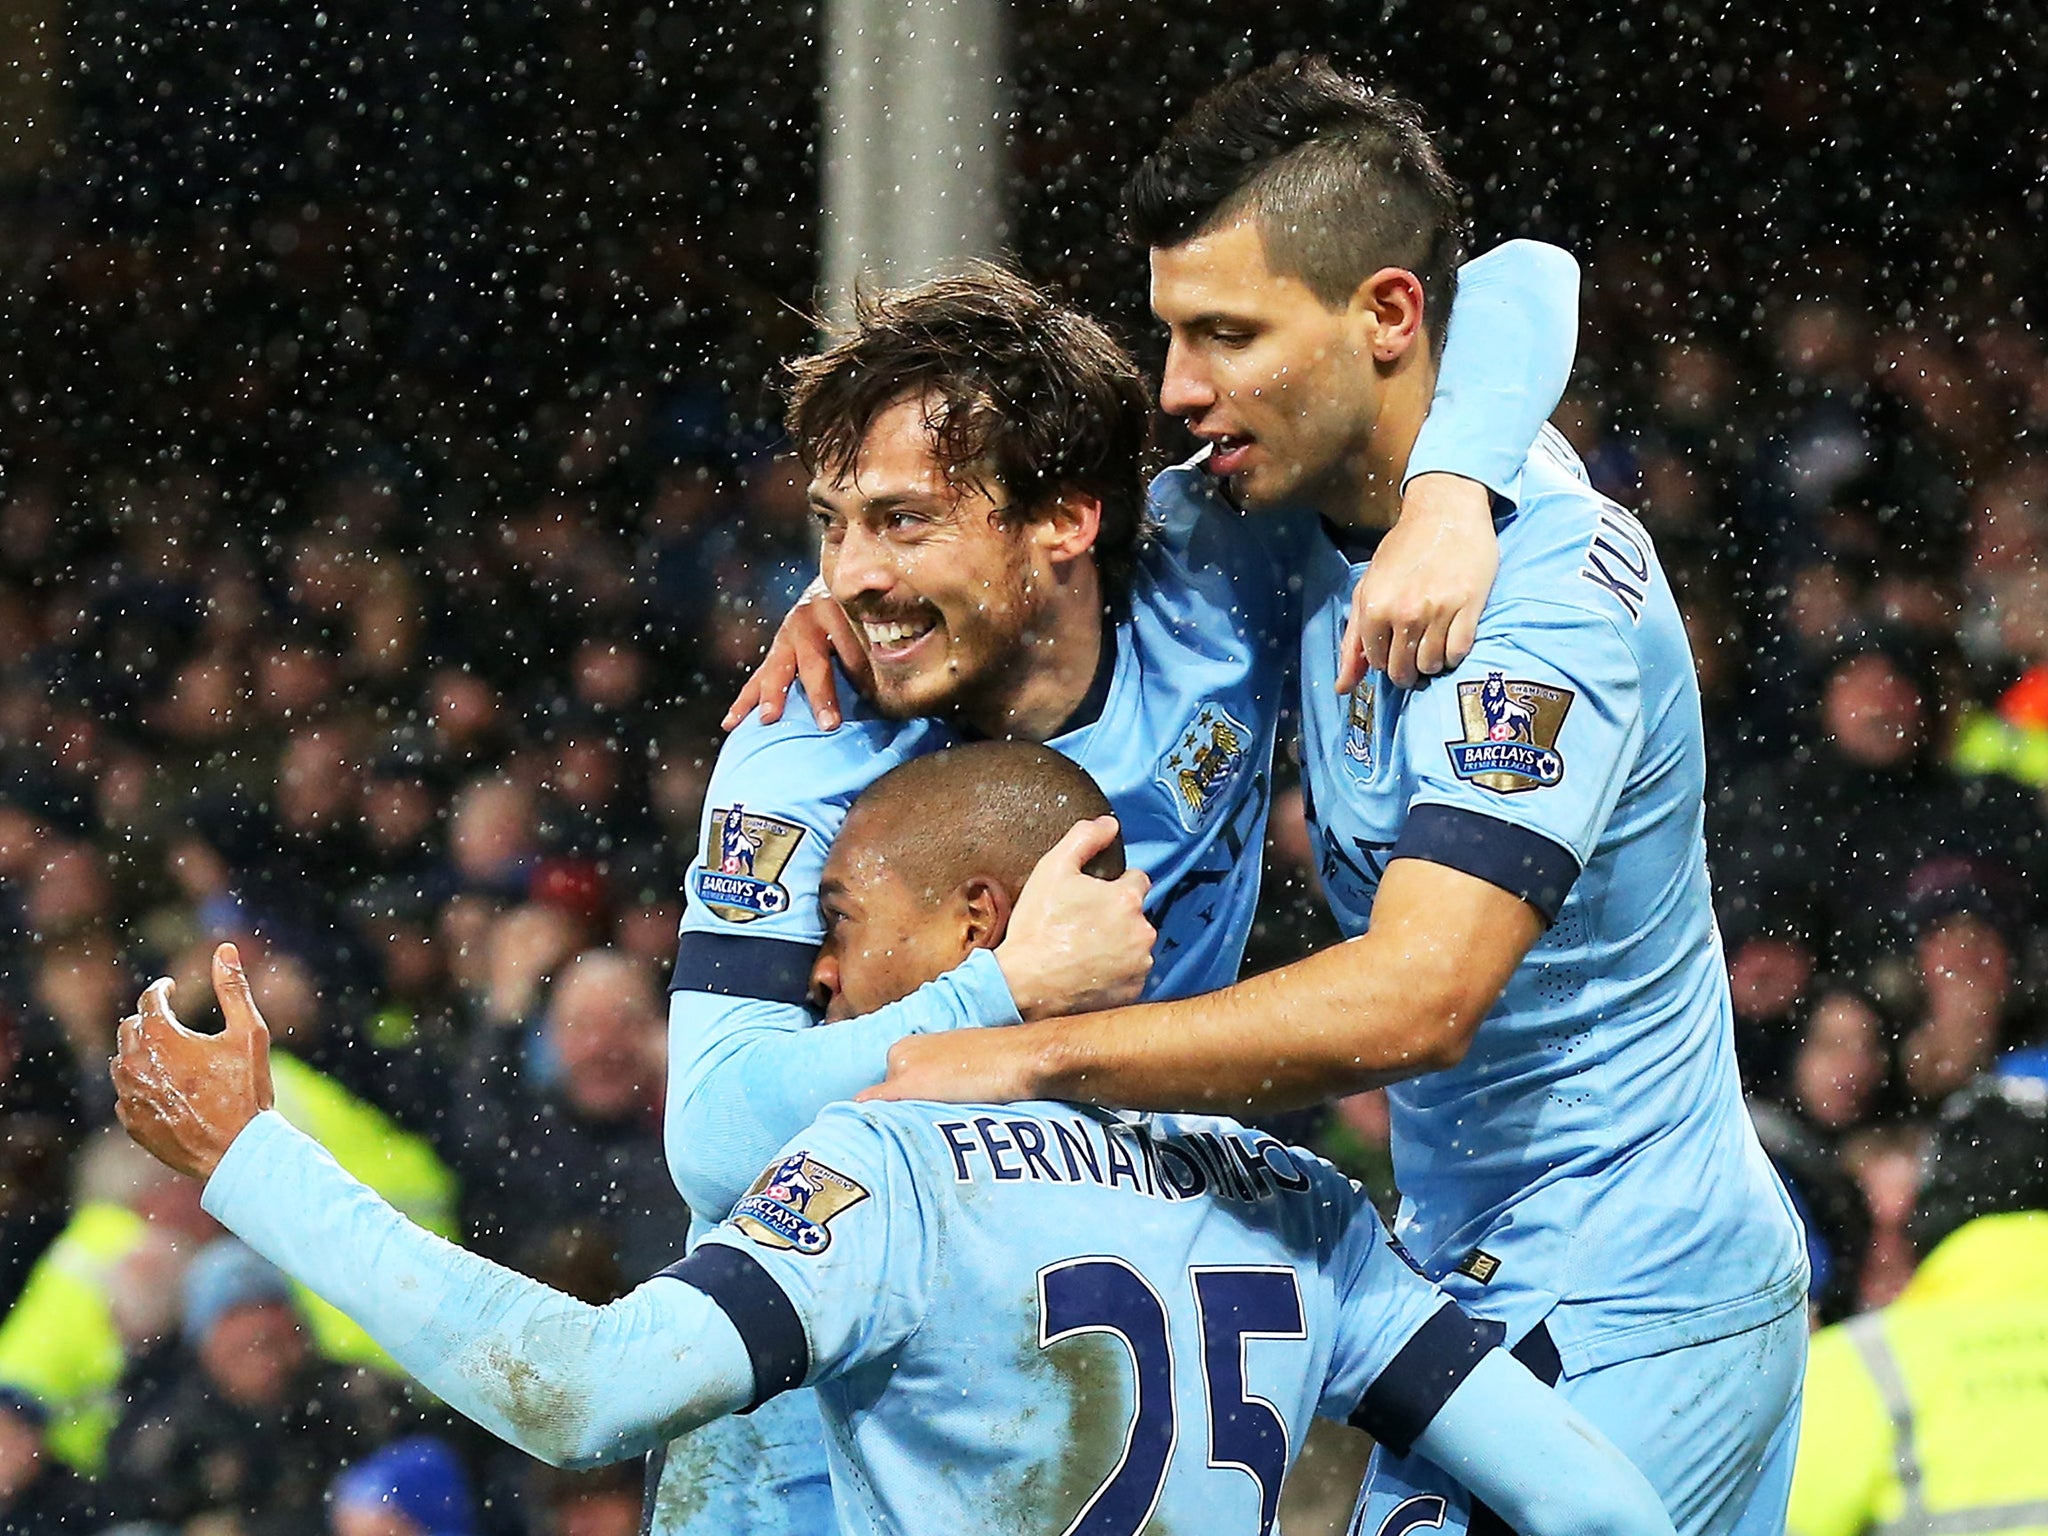 Fernandinho of Manchester City celebrates with teammates David Silva and Sergio Aguero after scoring the opening goal against Everton